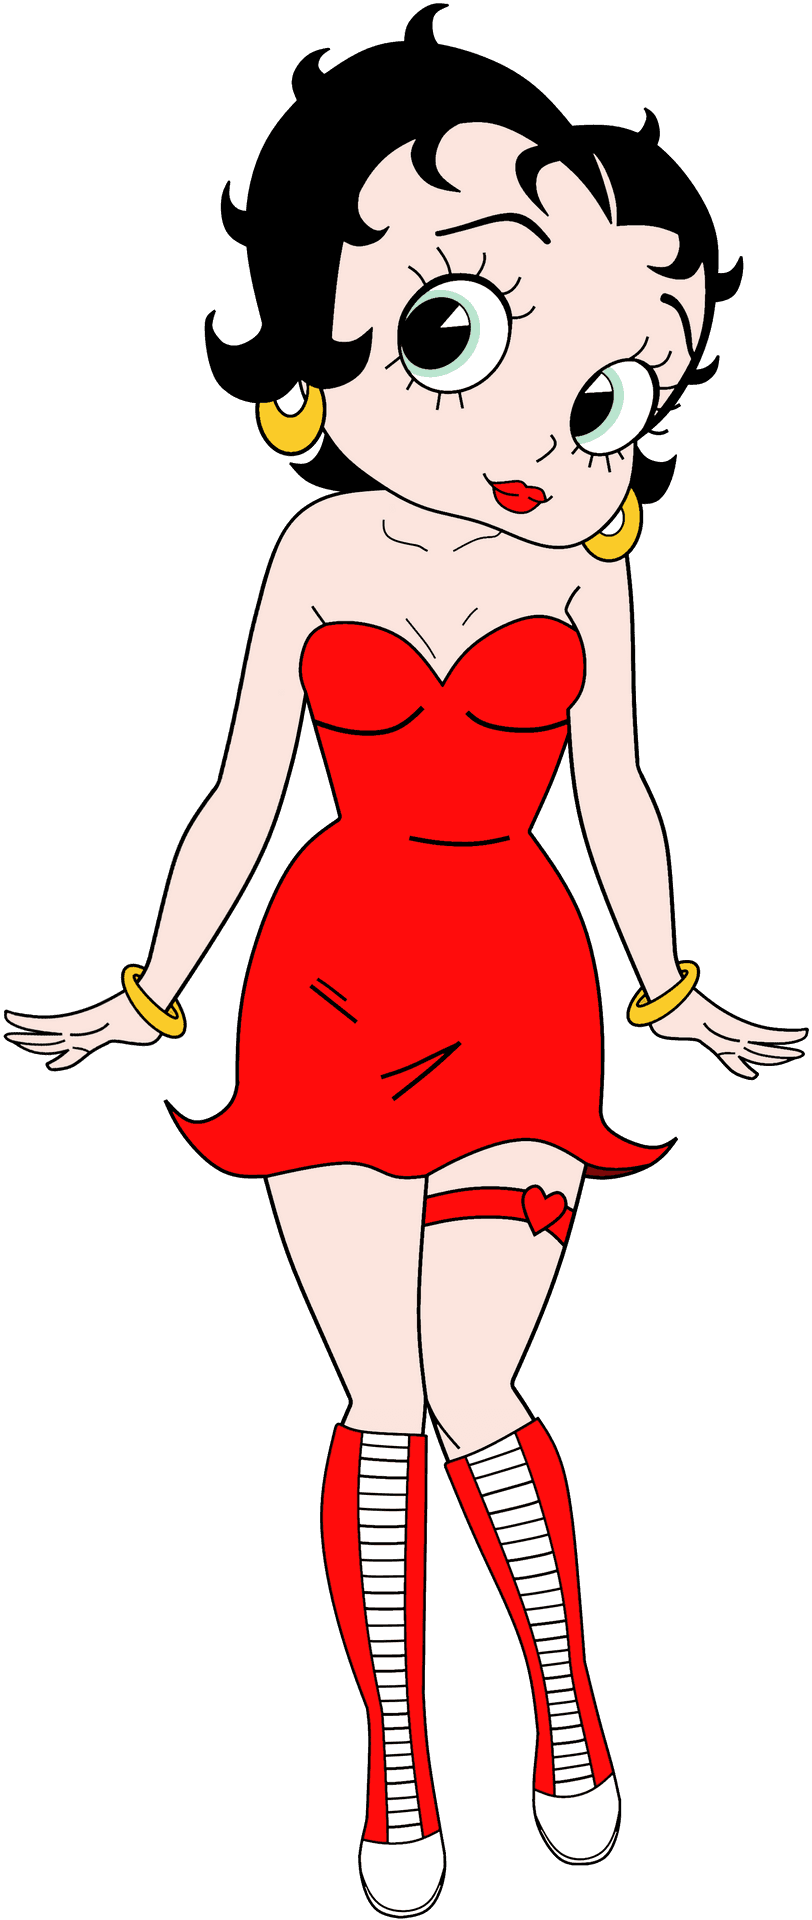 Download Betty Boop Making Her Signature Wink